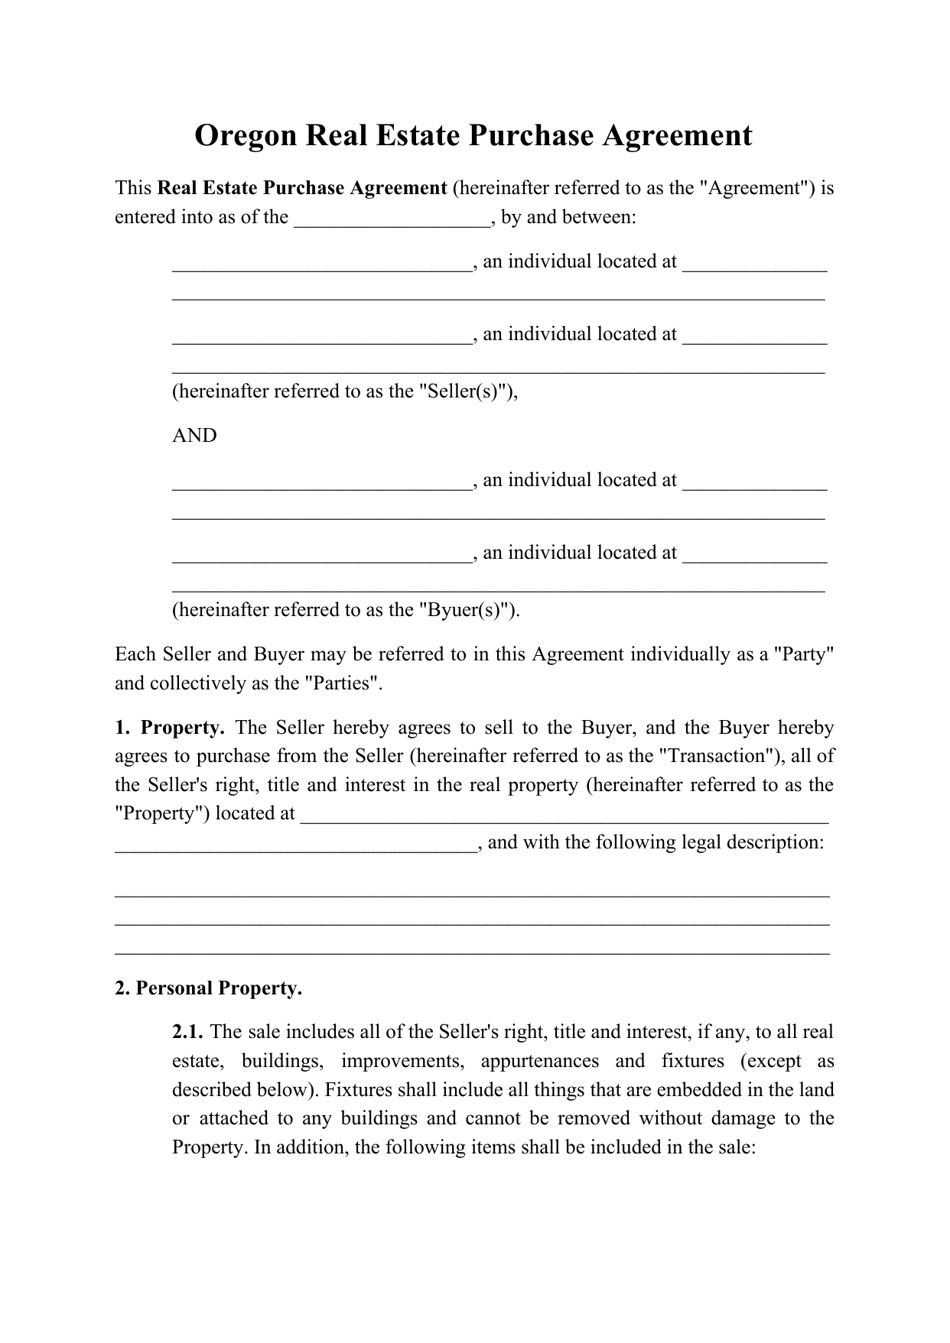 oregon-real-estate-purchase-agreement-template-fill-out-sign-online